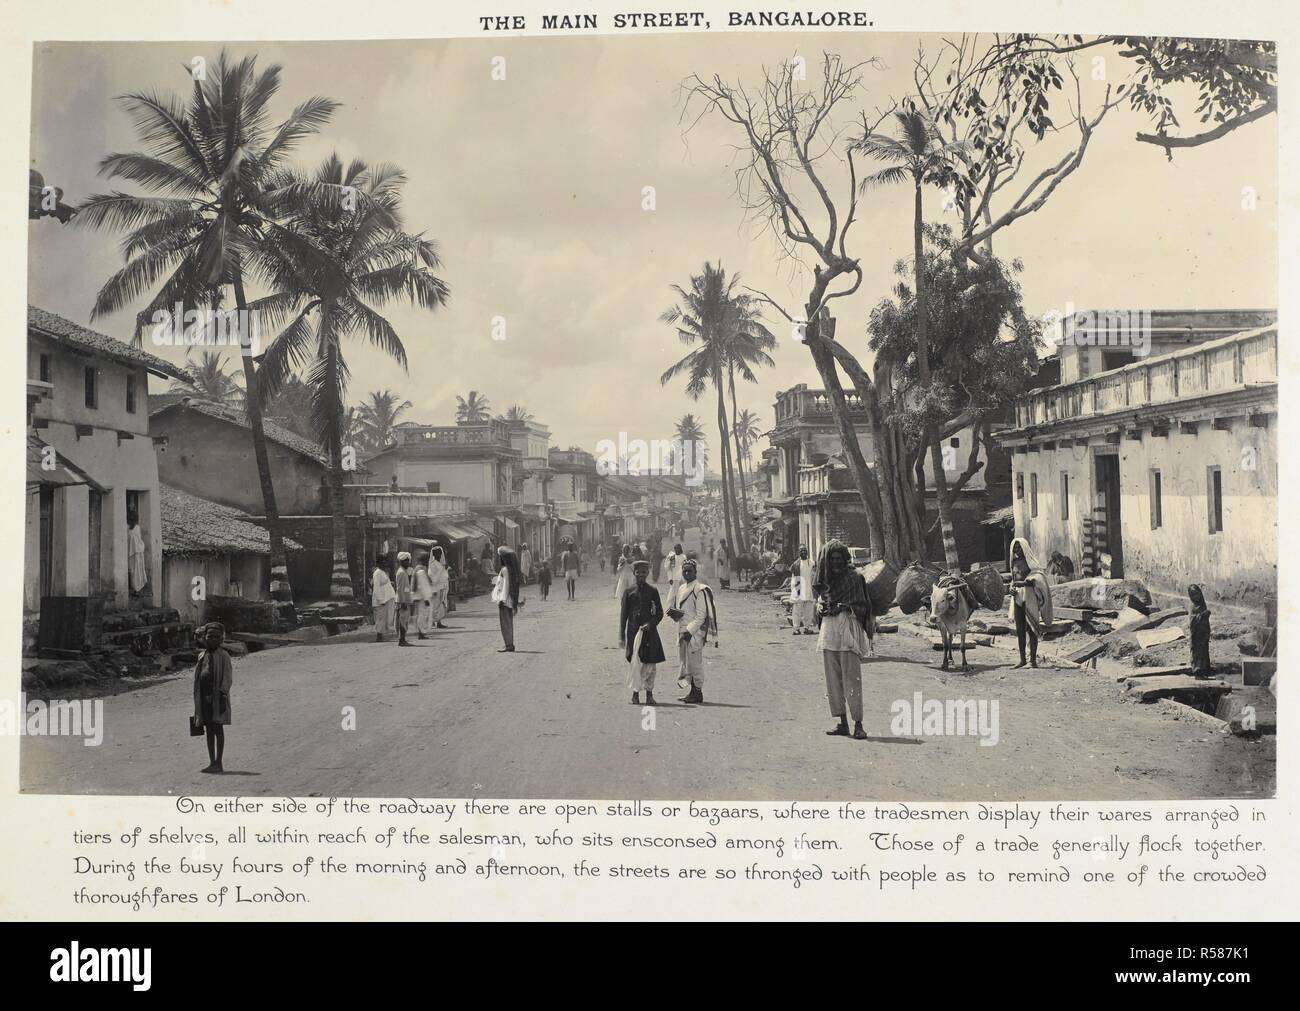 The Main Street, Bangalore. On either side, there are open stalls or bazaars where tradesmen display their wares . Curzon Collection: 'Souvenir of Mysore' Album. 1890s. Photograph. Source: Photo 430/41(88). Language: English. Author: UNKNOWN. Stock Photo